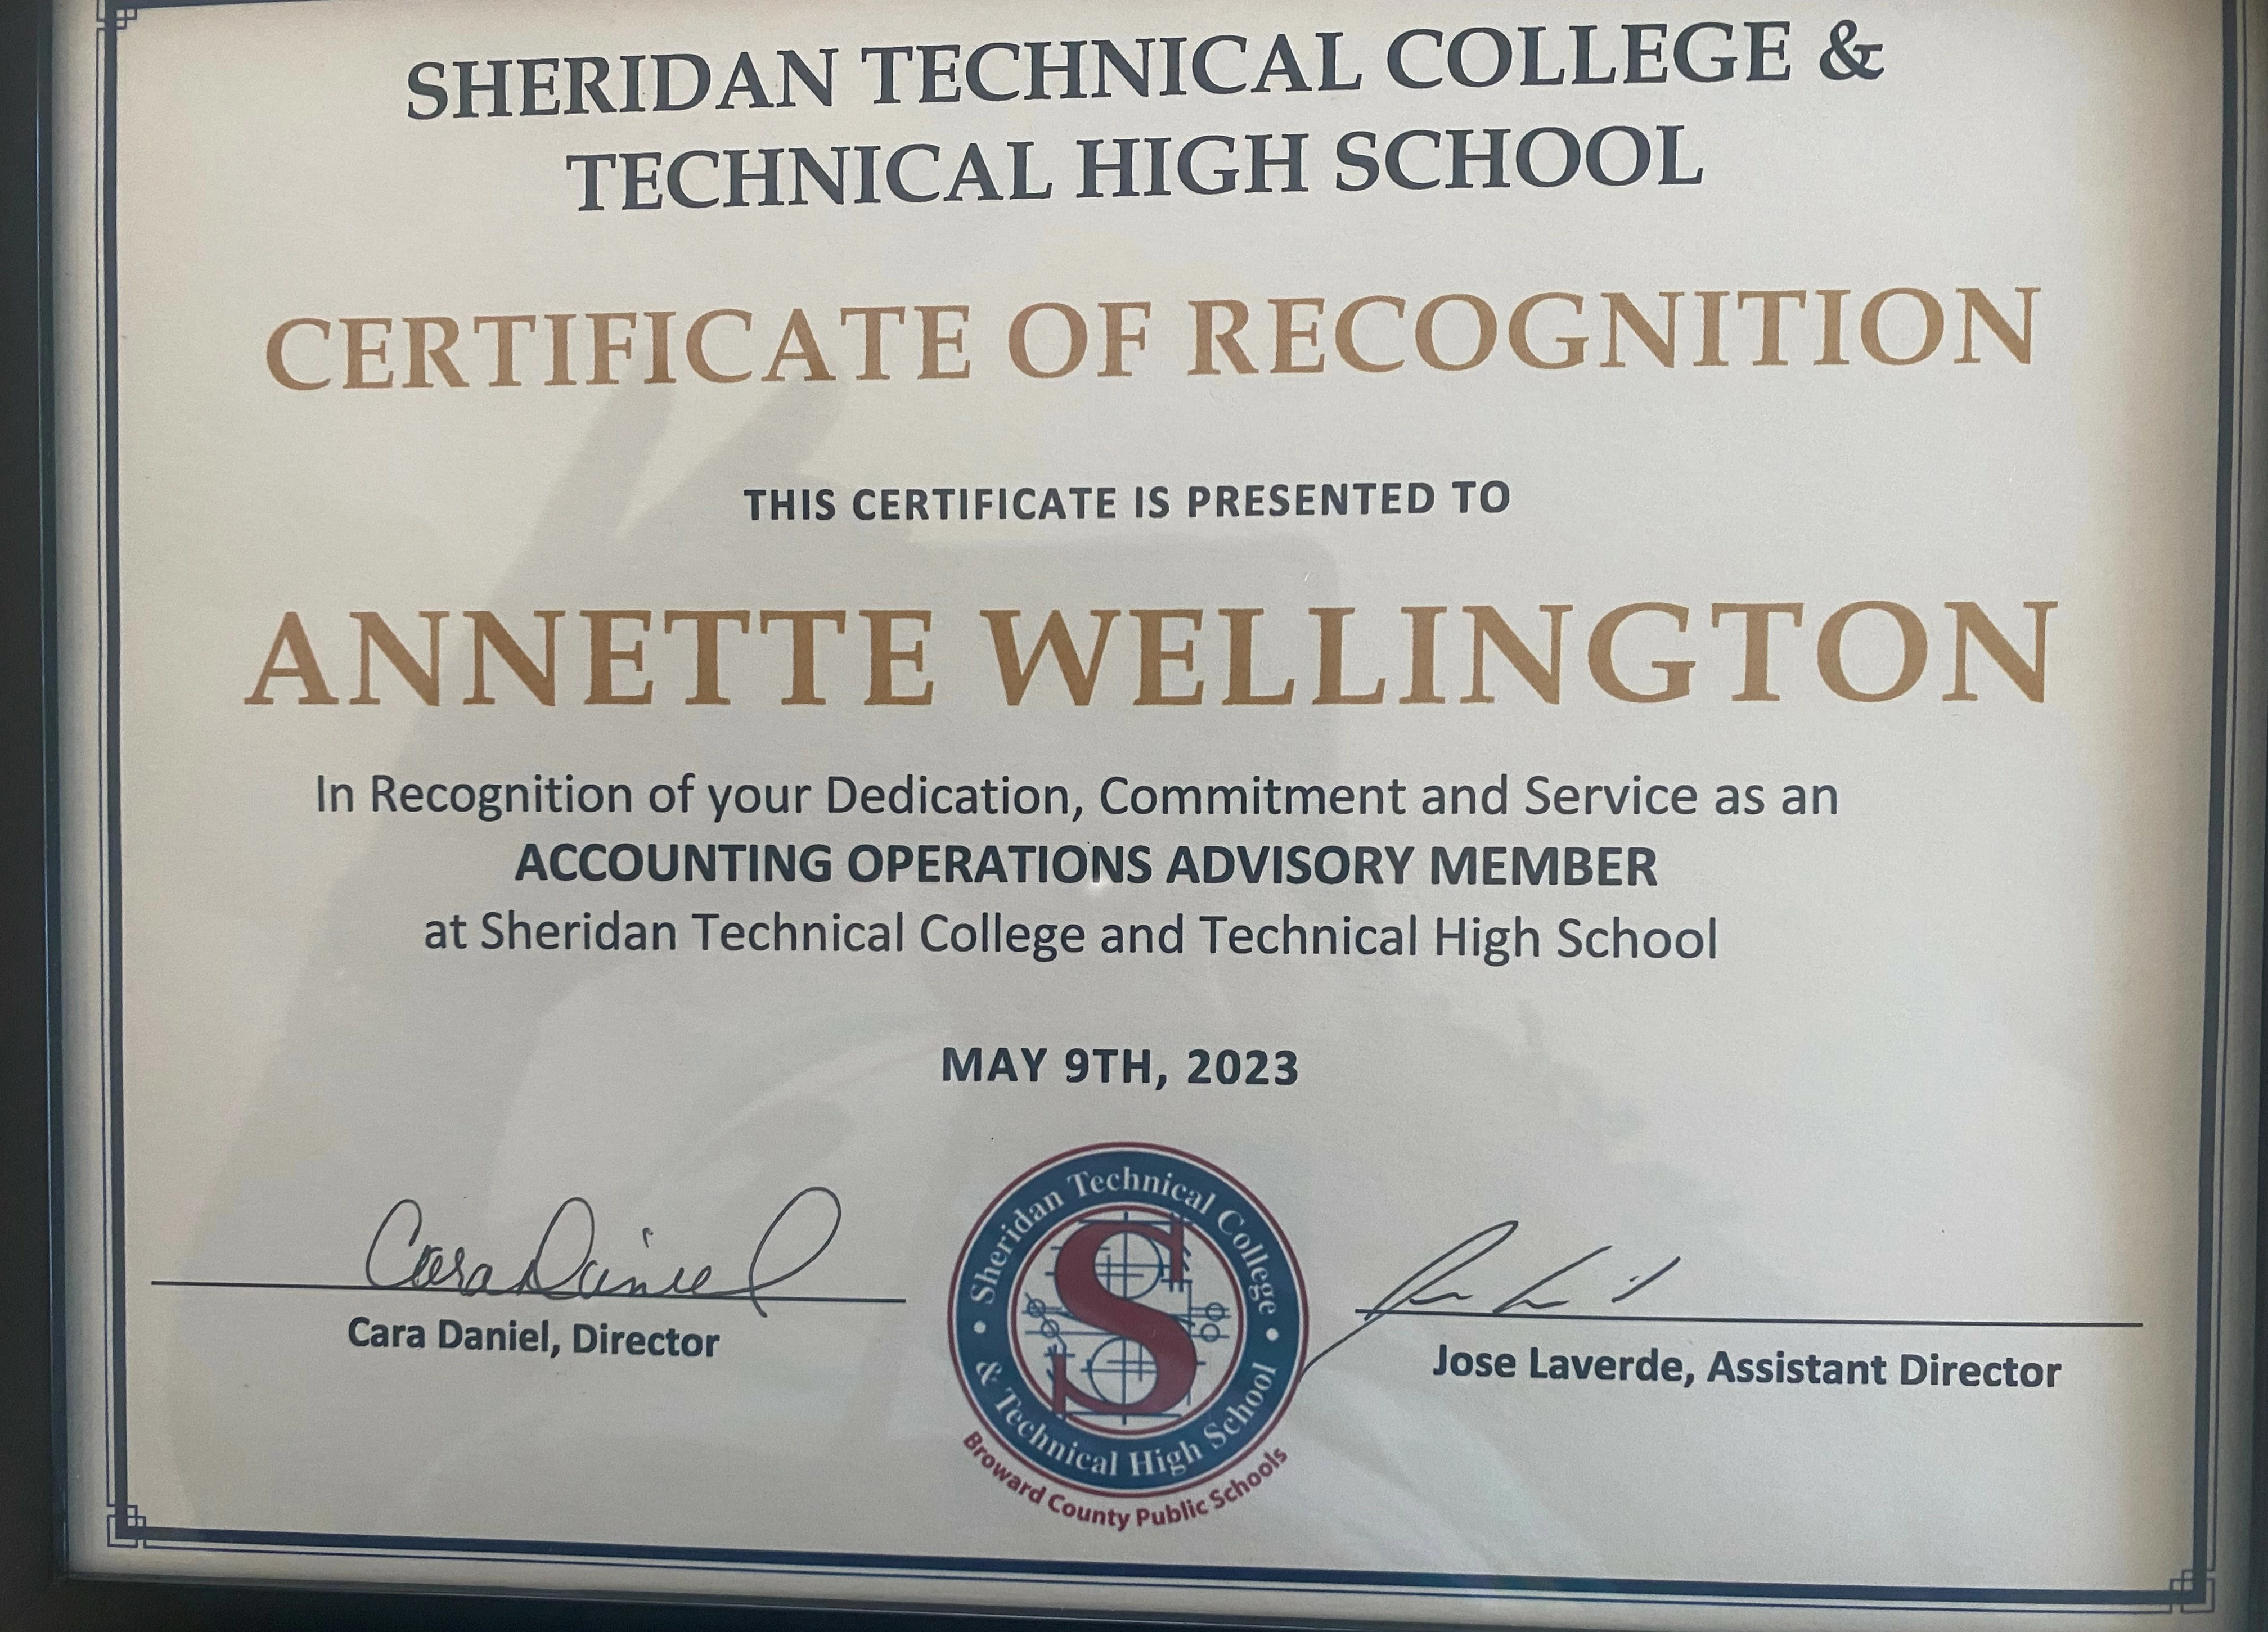 Annette Wellington, Certification of Recognition: Accounting Operations Advisory Member.